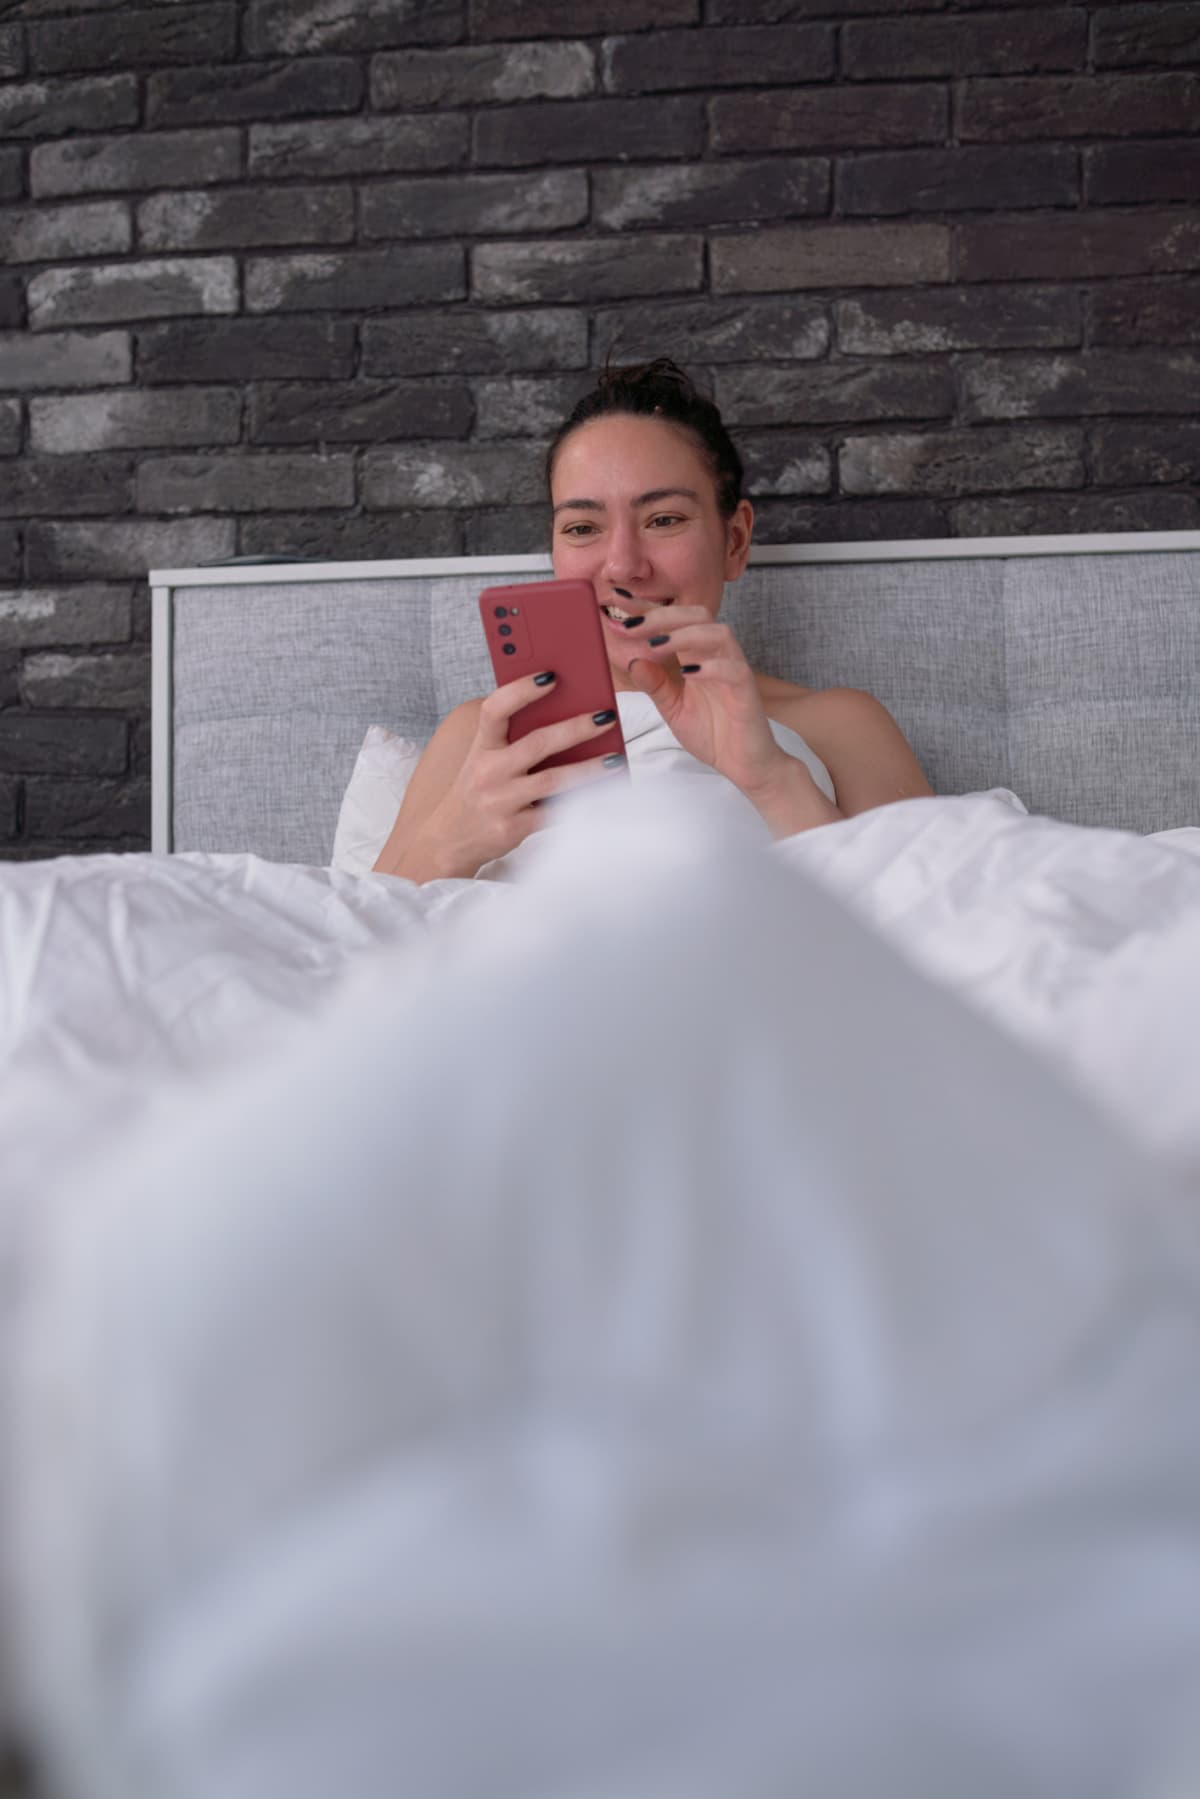 Happy female smiling and browsing social media on cellphone while resting in bed near brick wall in morning at home.